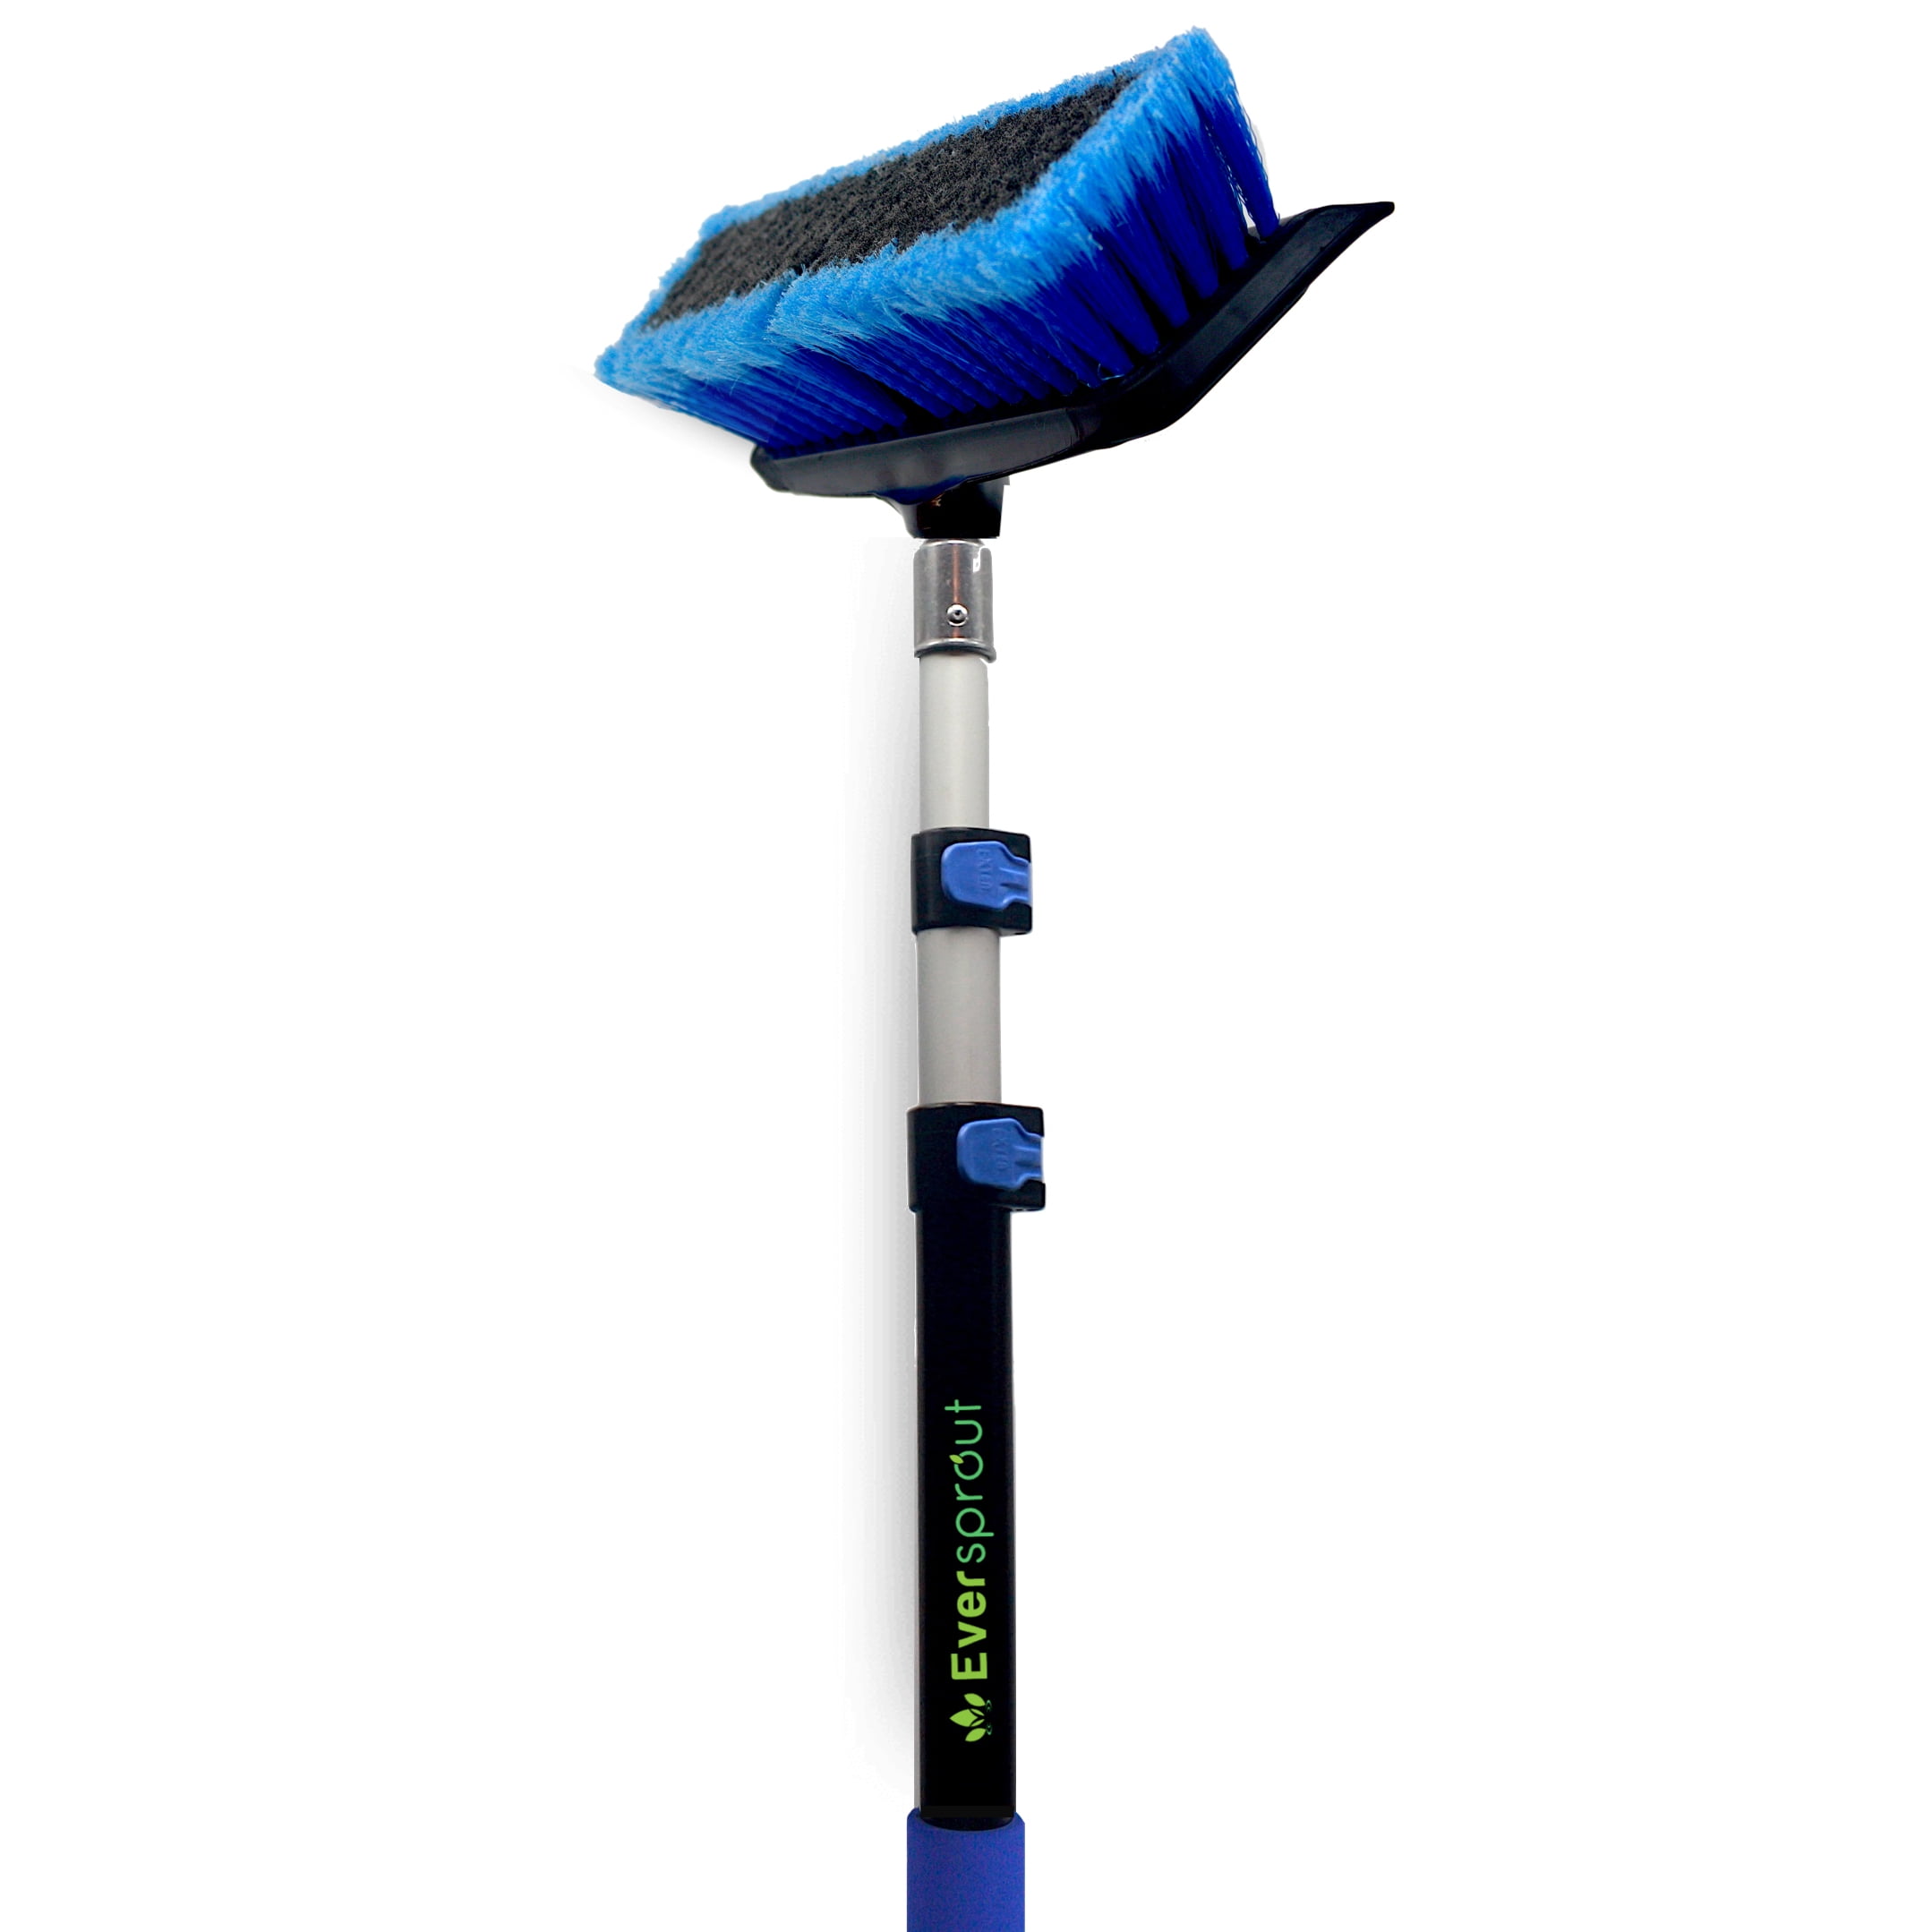 Docazoo docapole 11 inch hard bristle deck brush with 5-12 foot extension  pole: includes scrub brush with long handle telescoping pol